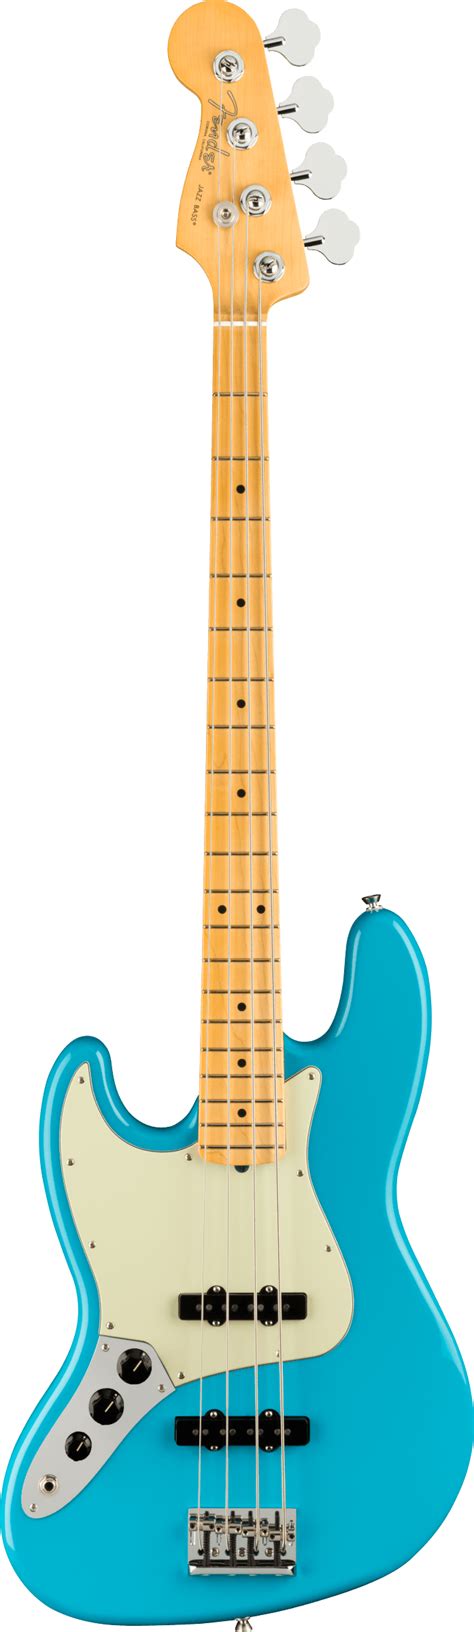 Fender American Professional Ii Jazz Bass Left Handed In Miami Blue